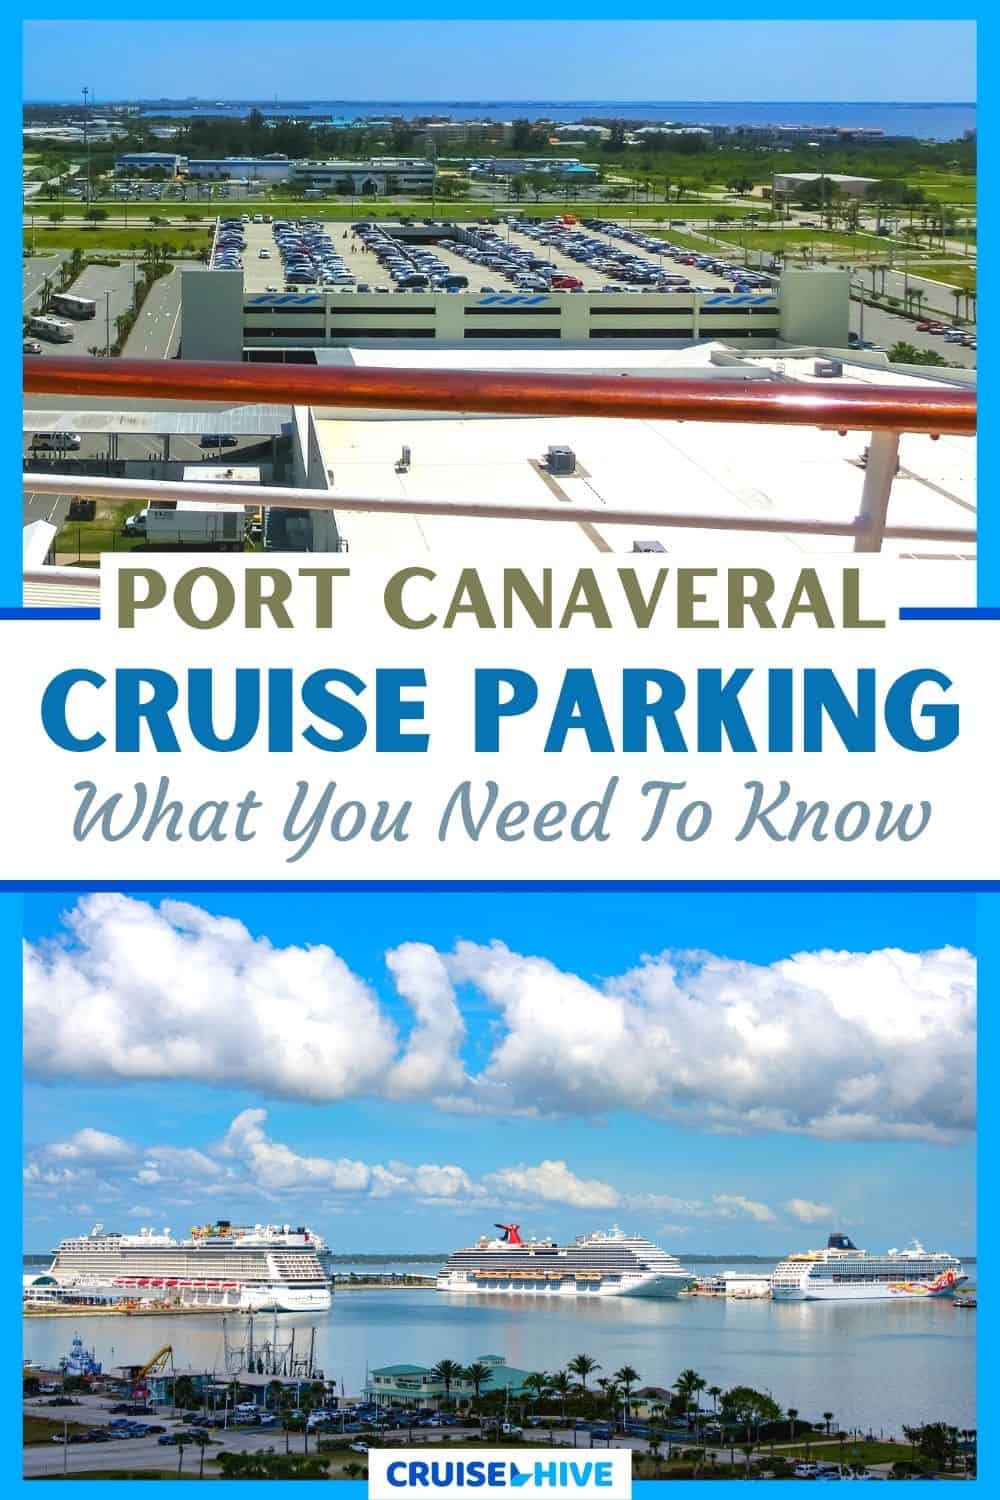 Port Canaveral Cruise Parking: What You Need to Know